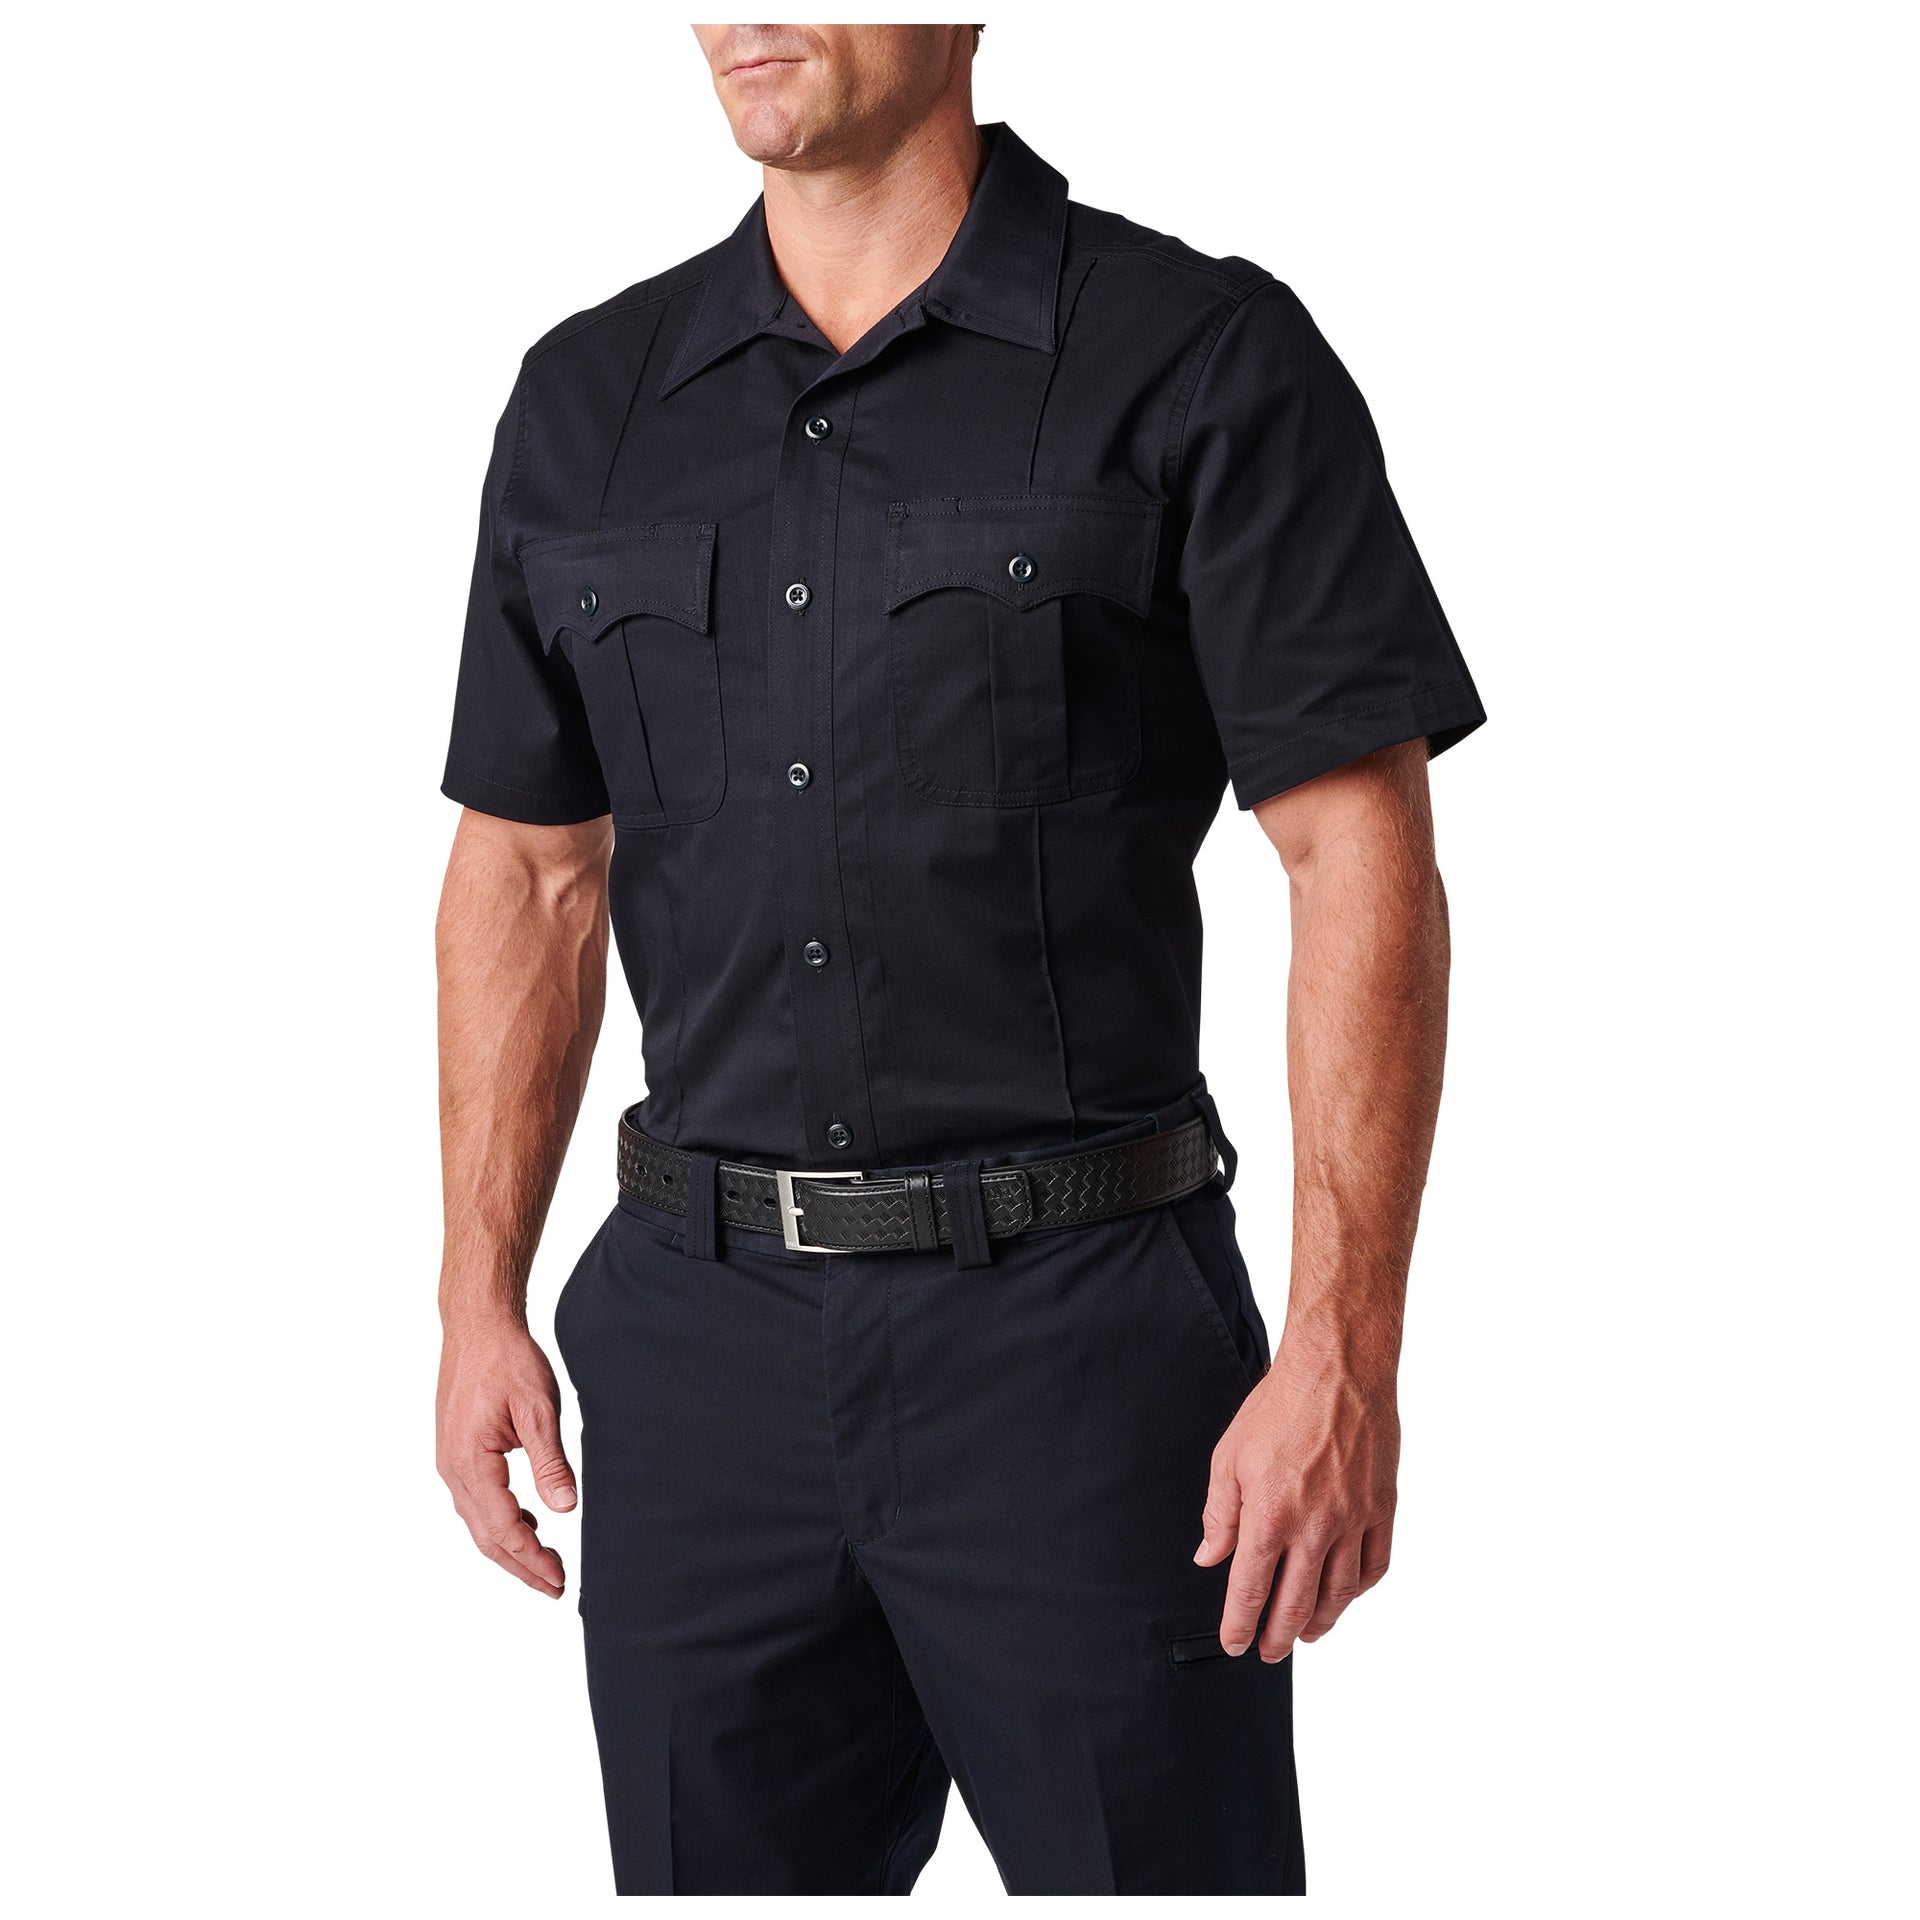 5.11 Tactical Mens Stryke Class A PDU Twill Short Sleeve Shirt (71405) | The Fire Center | Fuego Fire Center | Firefighter Gear | 5.11 Stryke® PDU® Class A Twill Shirt delivers comfort, durability, and high-performance utility in any field environment. Crafted from our Flex-Tac® mechanical stretch twill fabric, featuring triple-needle stitching, bartacking at key seams and stress points, a Teflon™ finish.